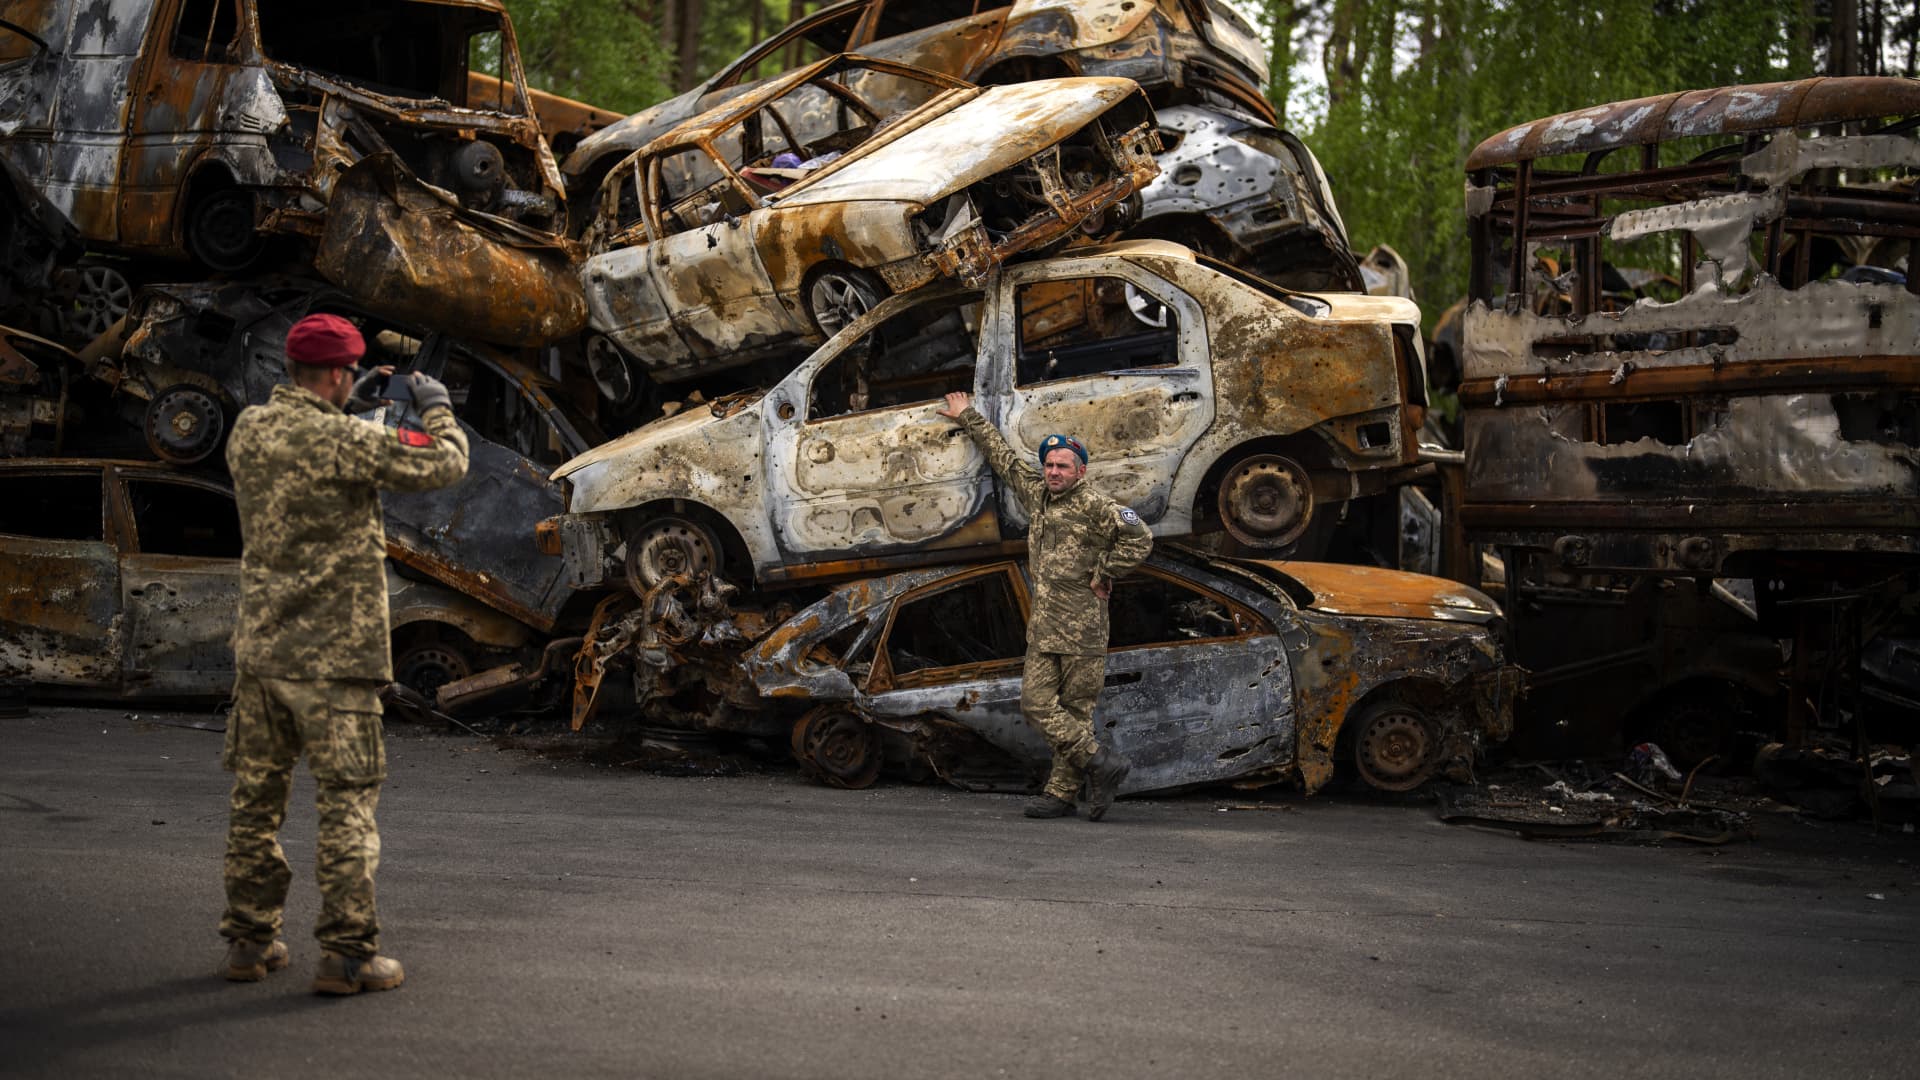 A territorial defence man poses for a photo next to cars destroyed during the Russian occupation in Irpin, on the outskirts of Kyiv, on Saturday, May 7, 2022.